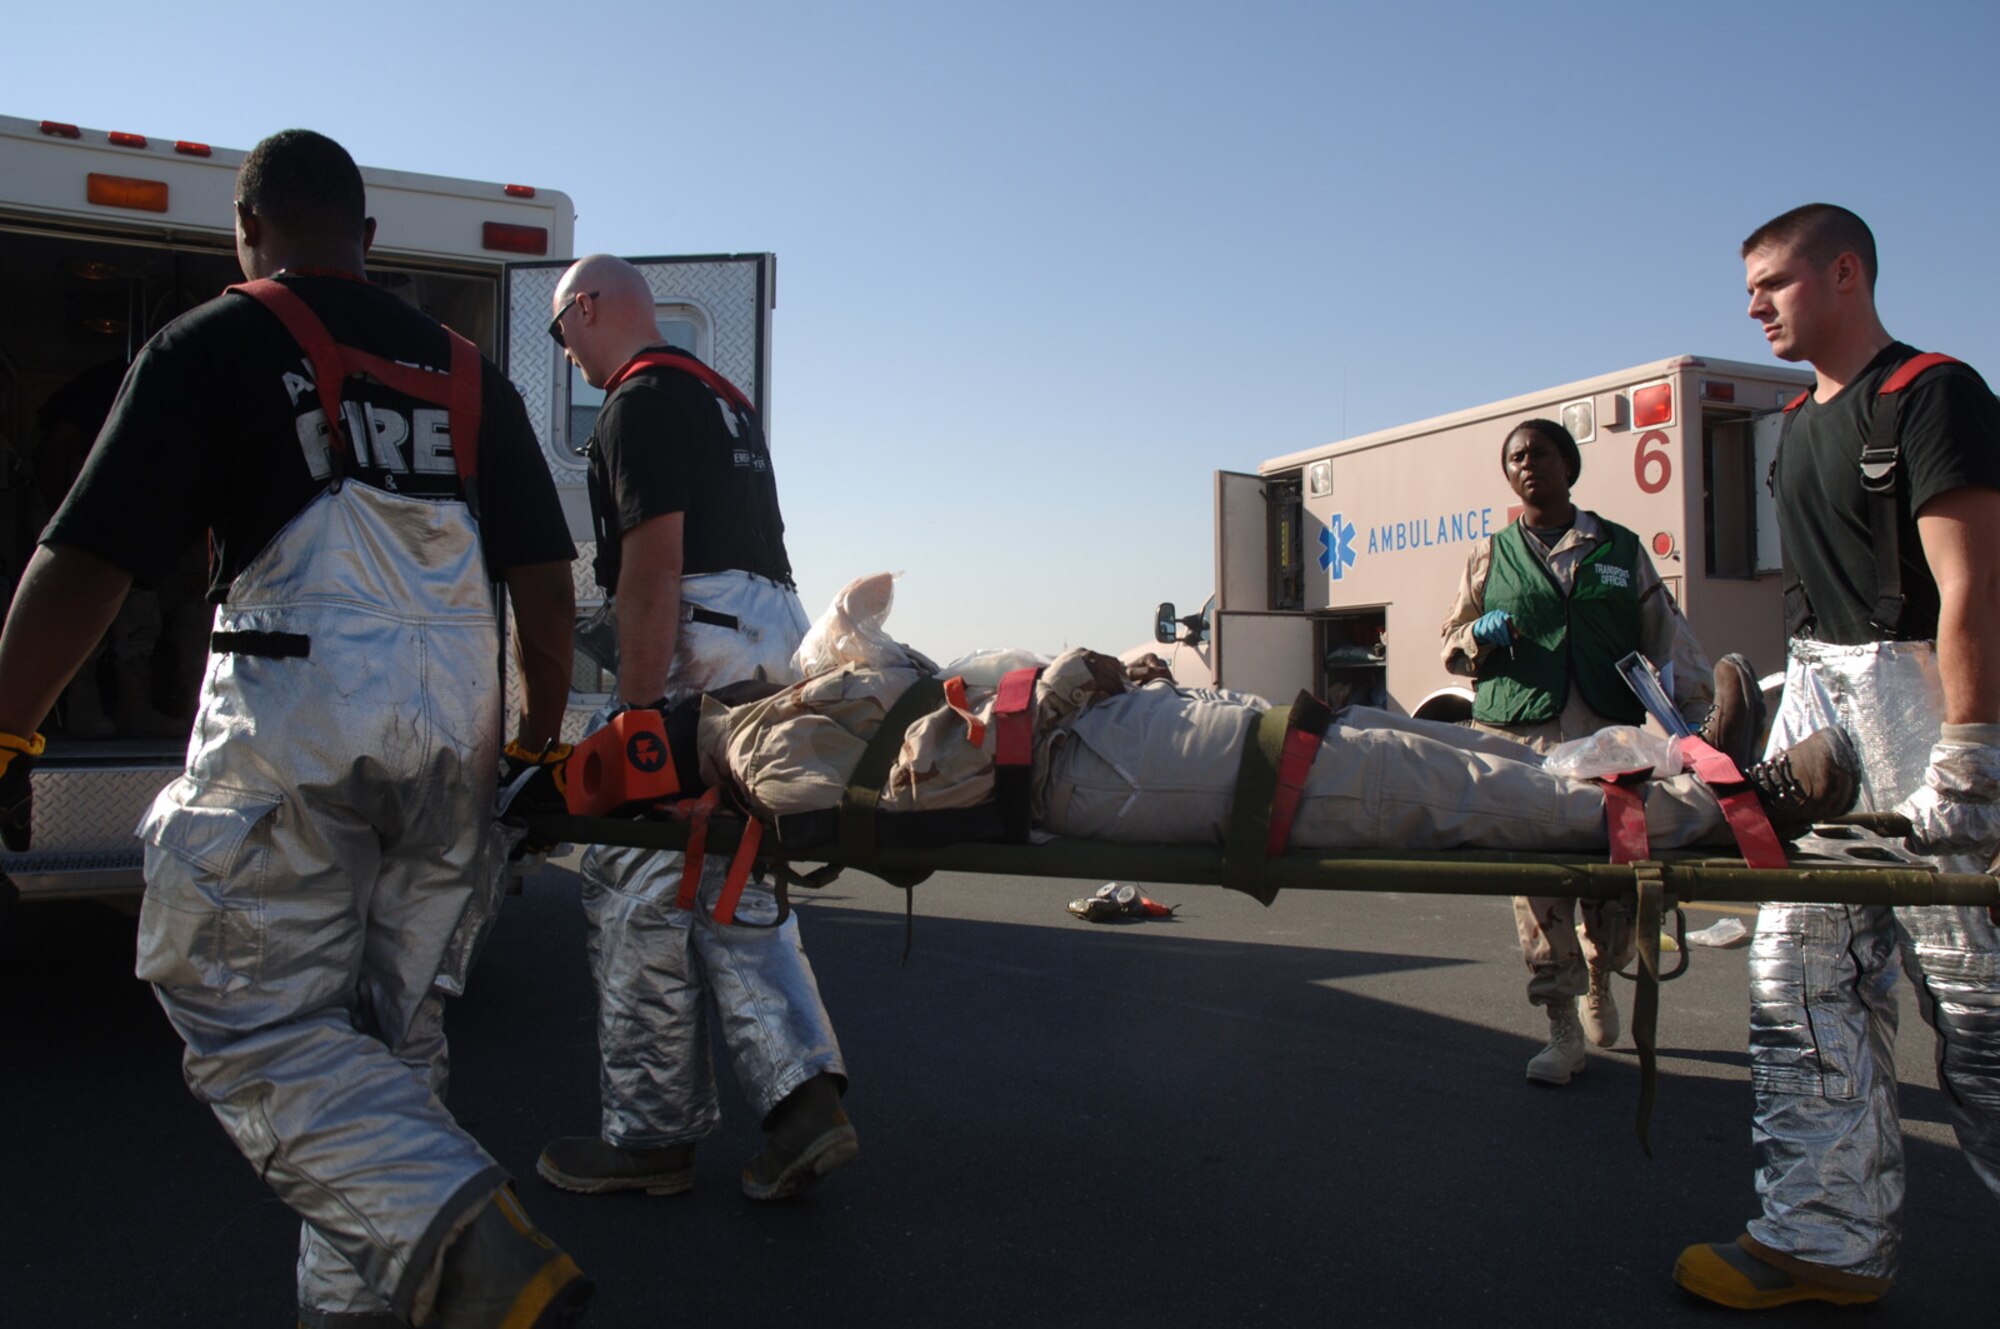 SOUTHWEST ASIA - Emergency services Airmen respond to victims following an aircraft incident during a Major Accident Response Exercise  at a Southwest Asia air base Dec. 14.  (U. S. Air Force photo/Staff Sgt. Douglas Olsen)